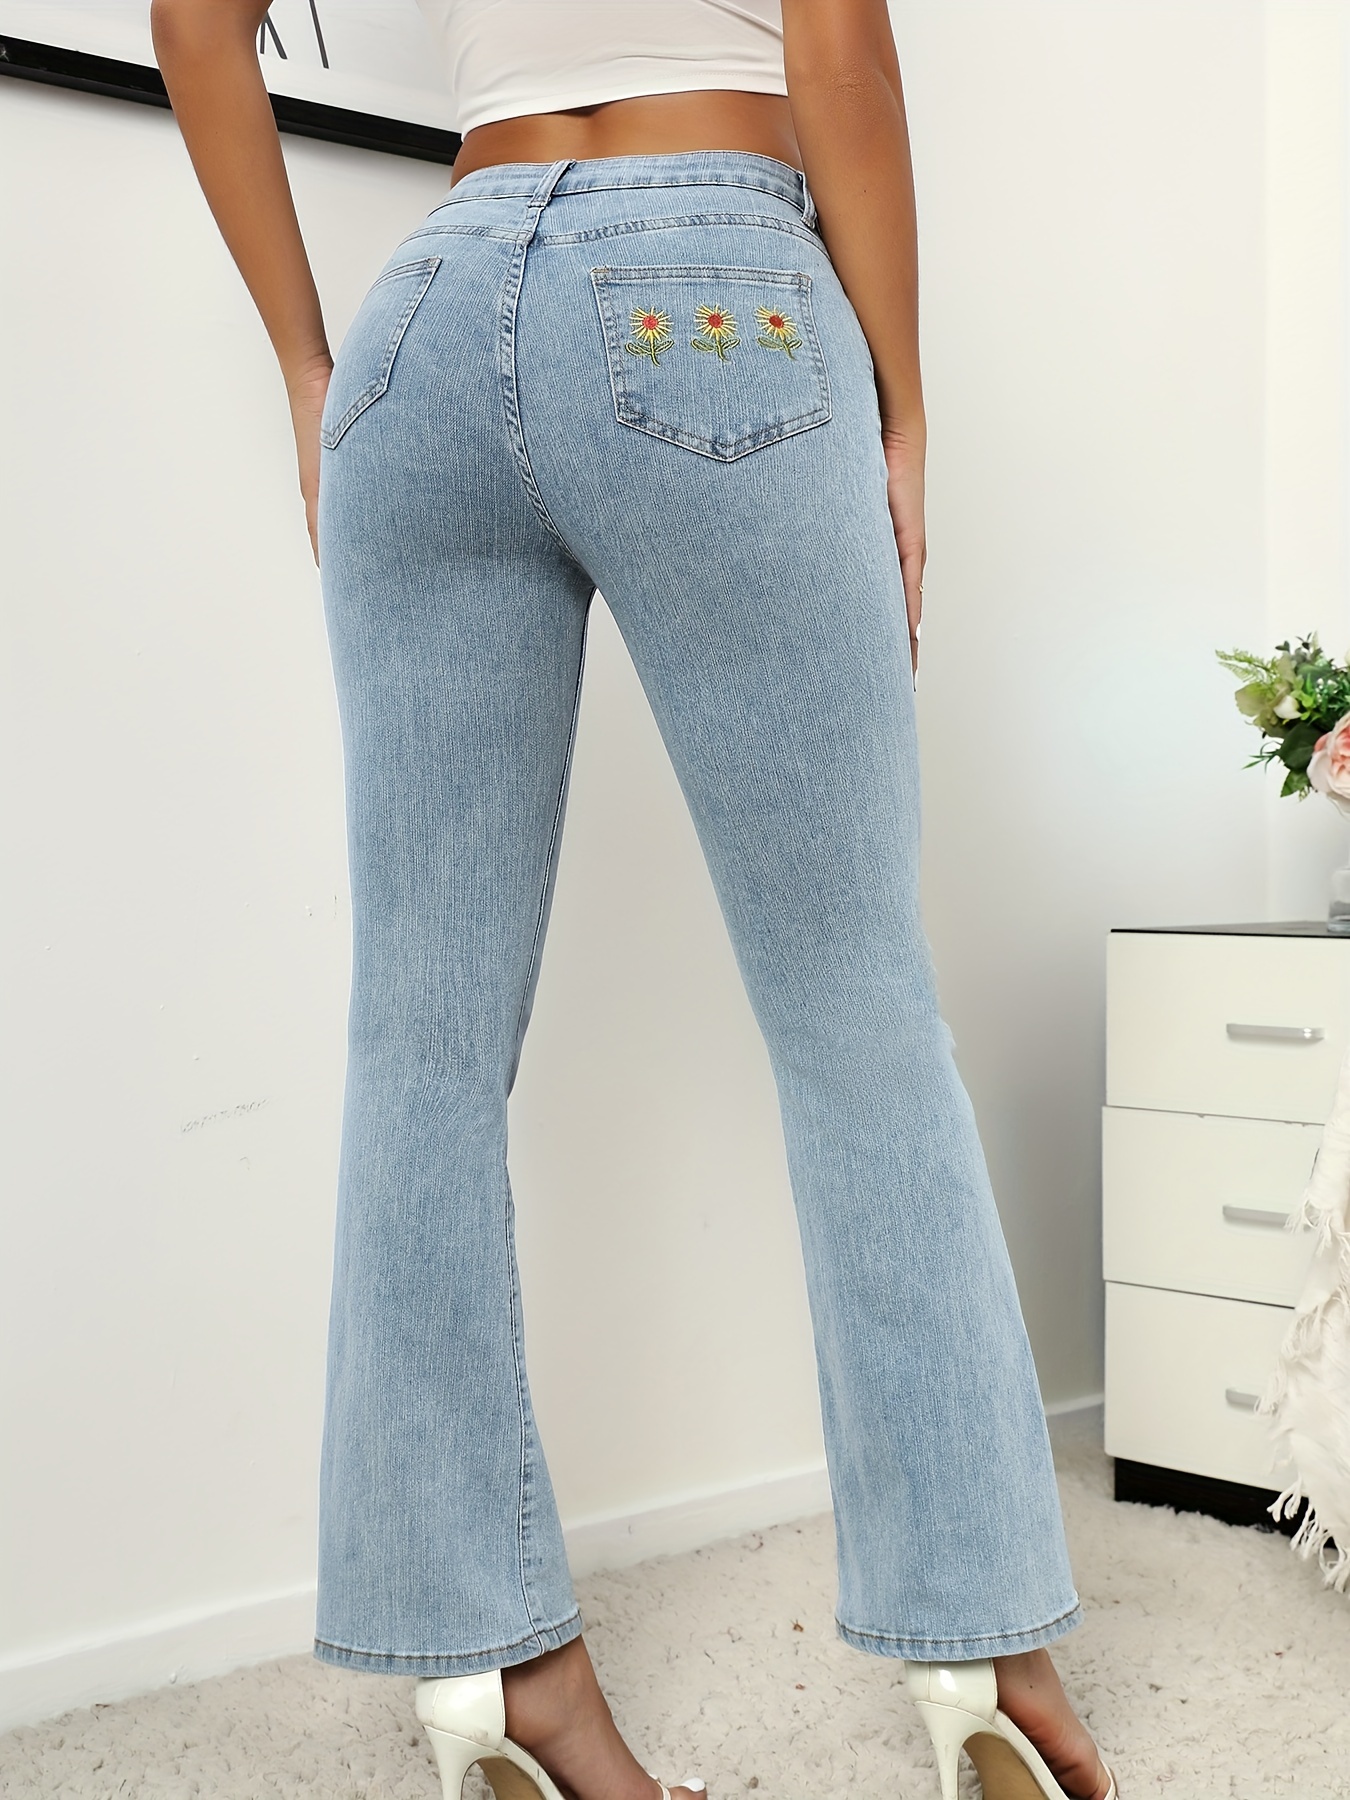 Floral Embroidered Decor Flare Jeans, High Stretch Slant Pockets Bell  Bottom Jeans, Women's Denim Jeans & Clothing